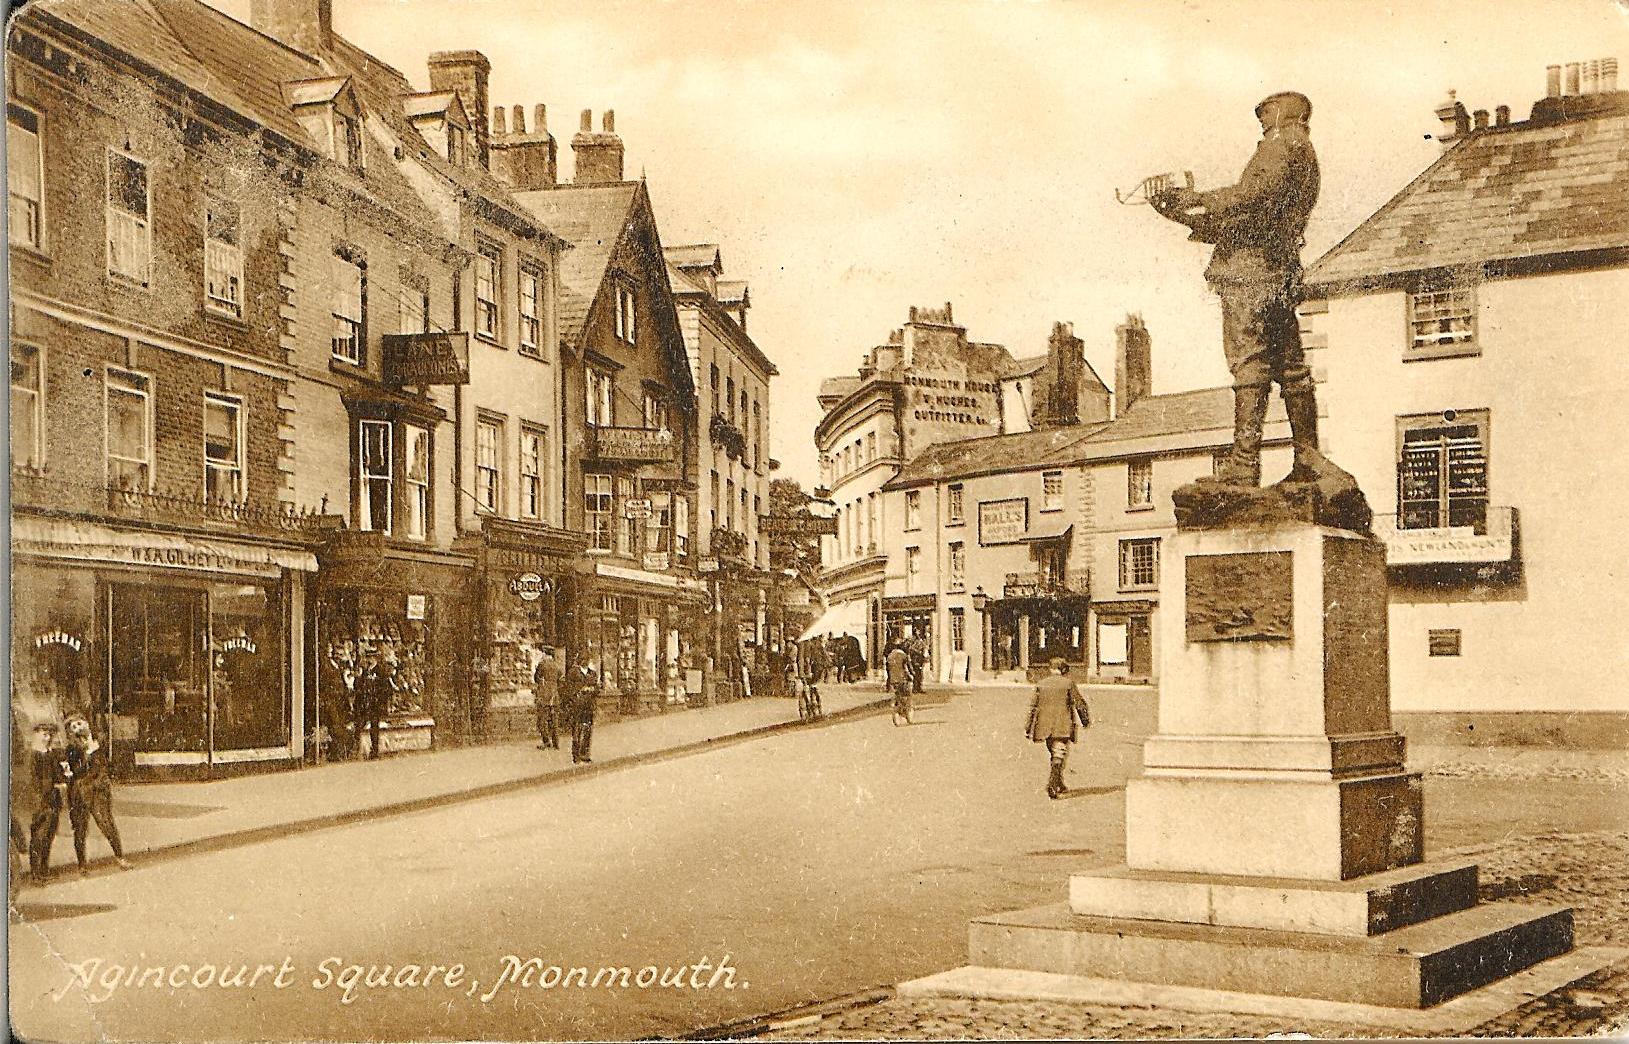 Agincourt Square in Monmouth in the 1910s